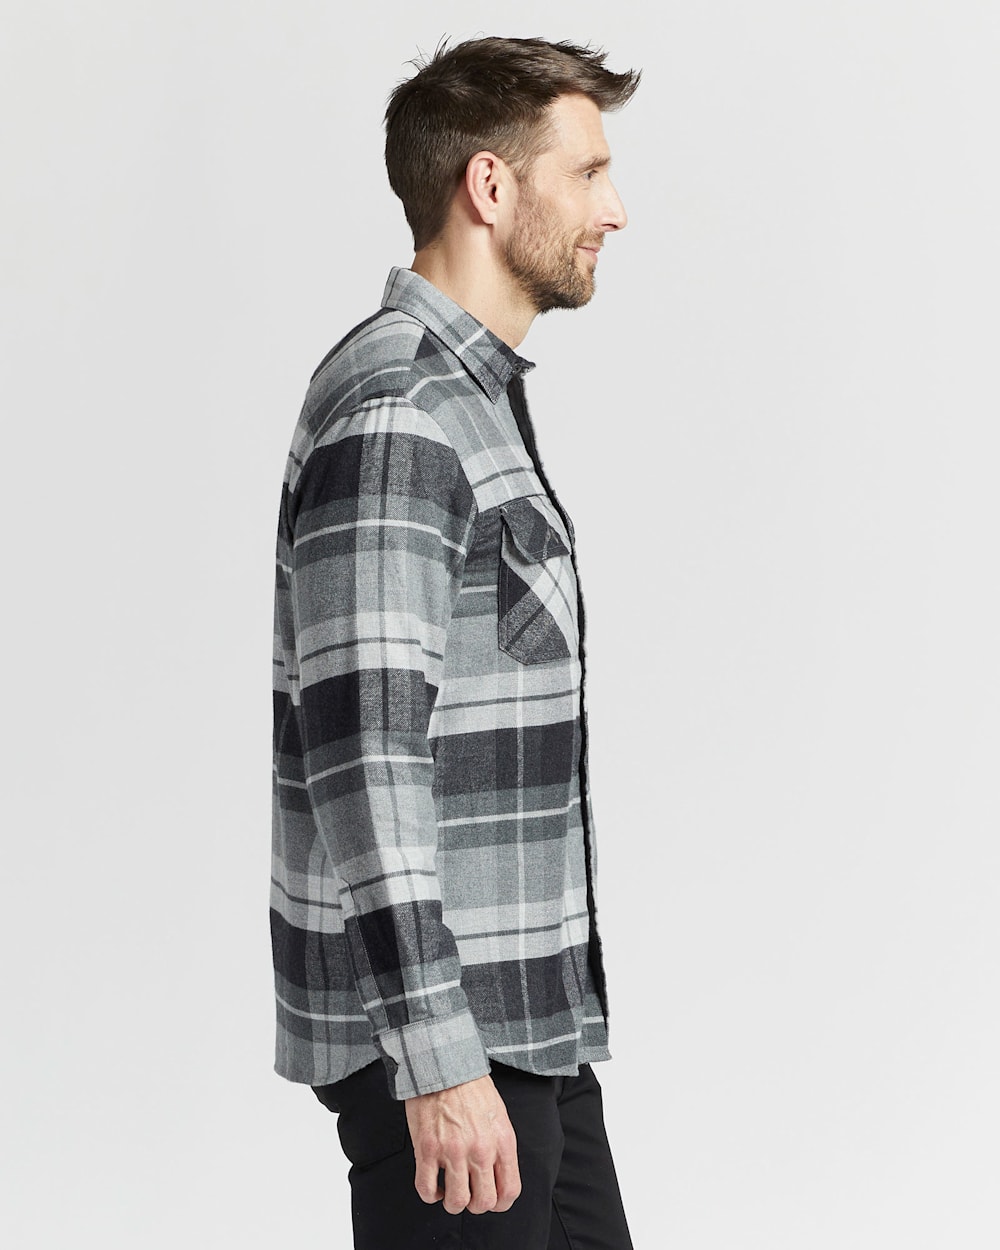 ALTERNATE VIEW OF MEN'S PLAID BURNSIDE DOUBLE-BRUSHED FLANNEL SHIRT IN GREY PLAID image number 2